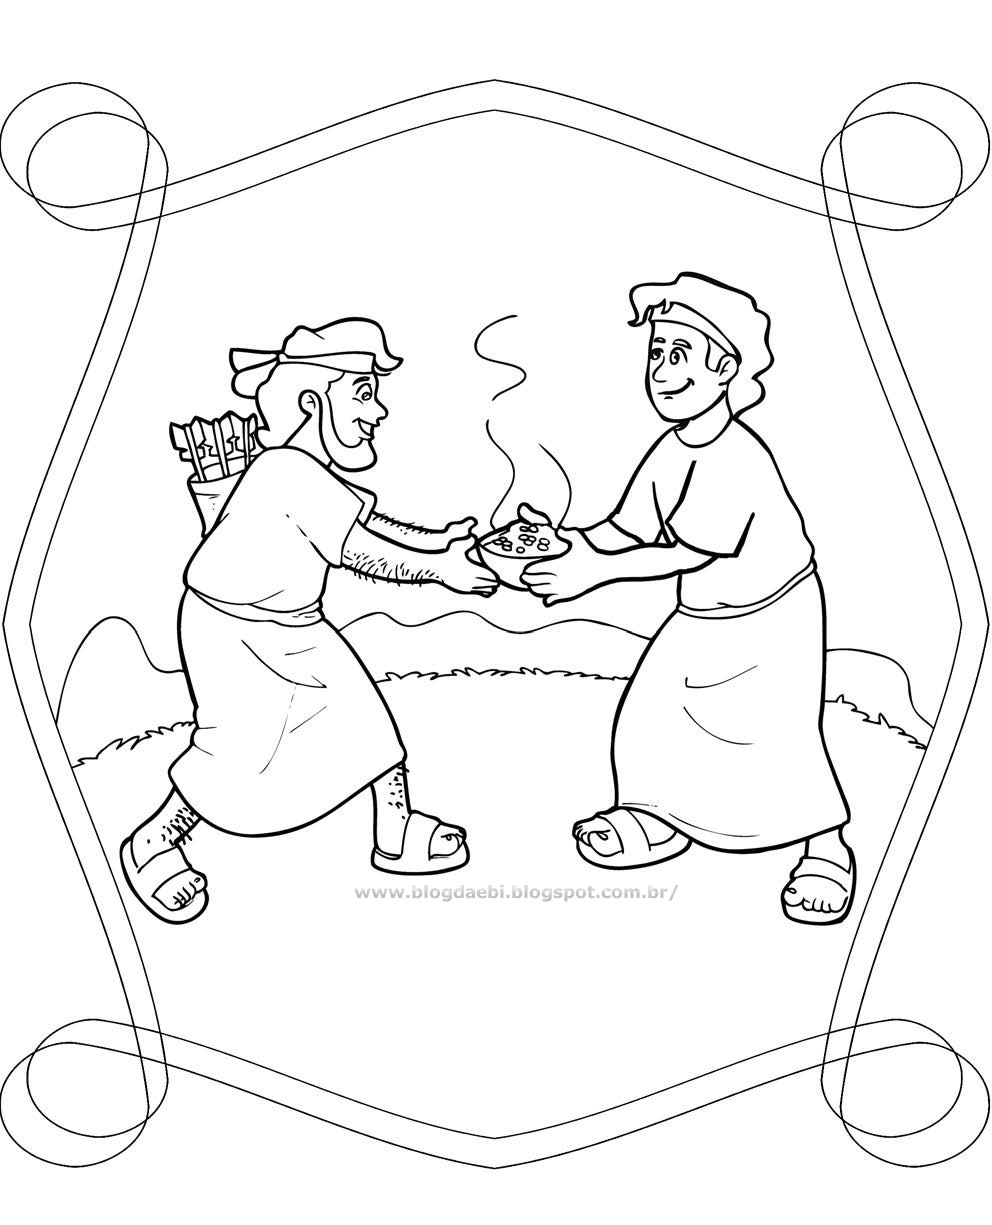 Jacob And Esau Coloring Pages Images. esau and jacob coloring ...